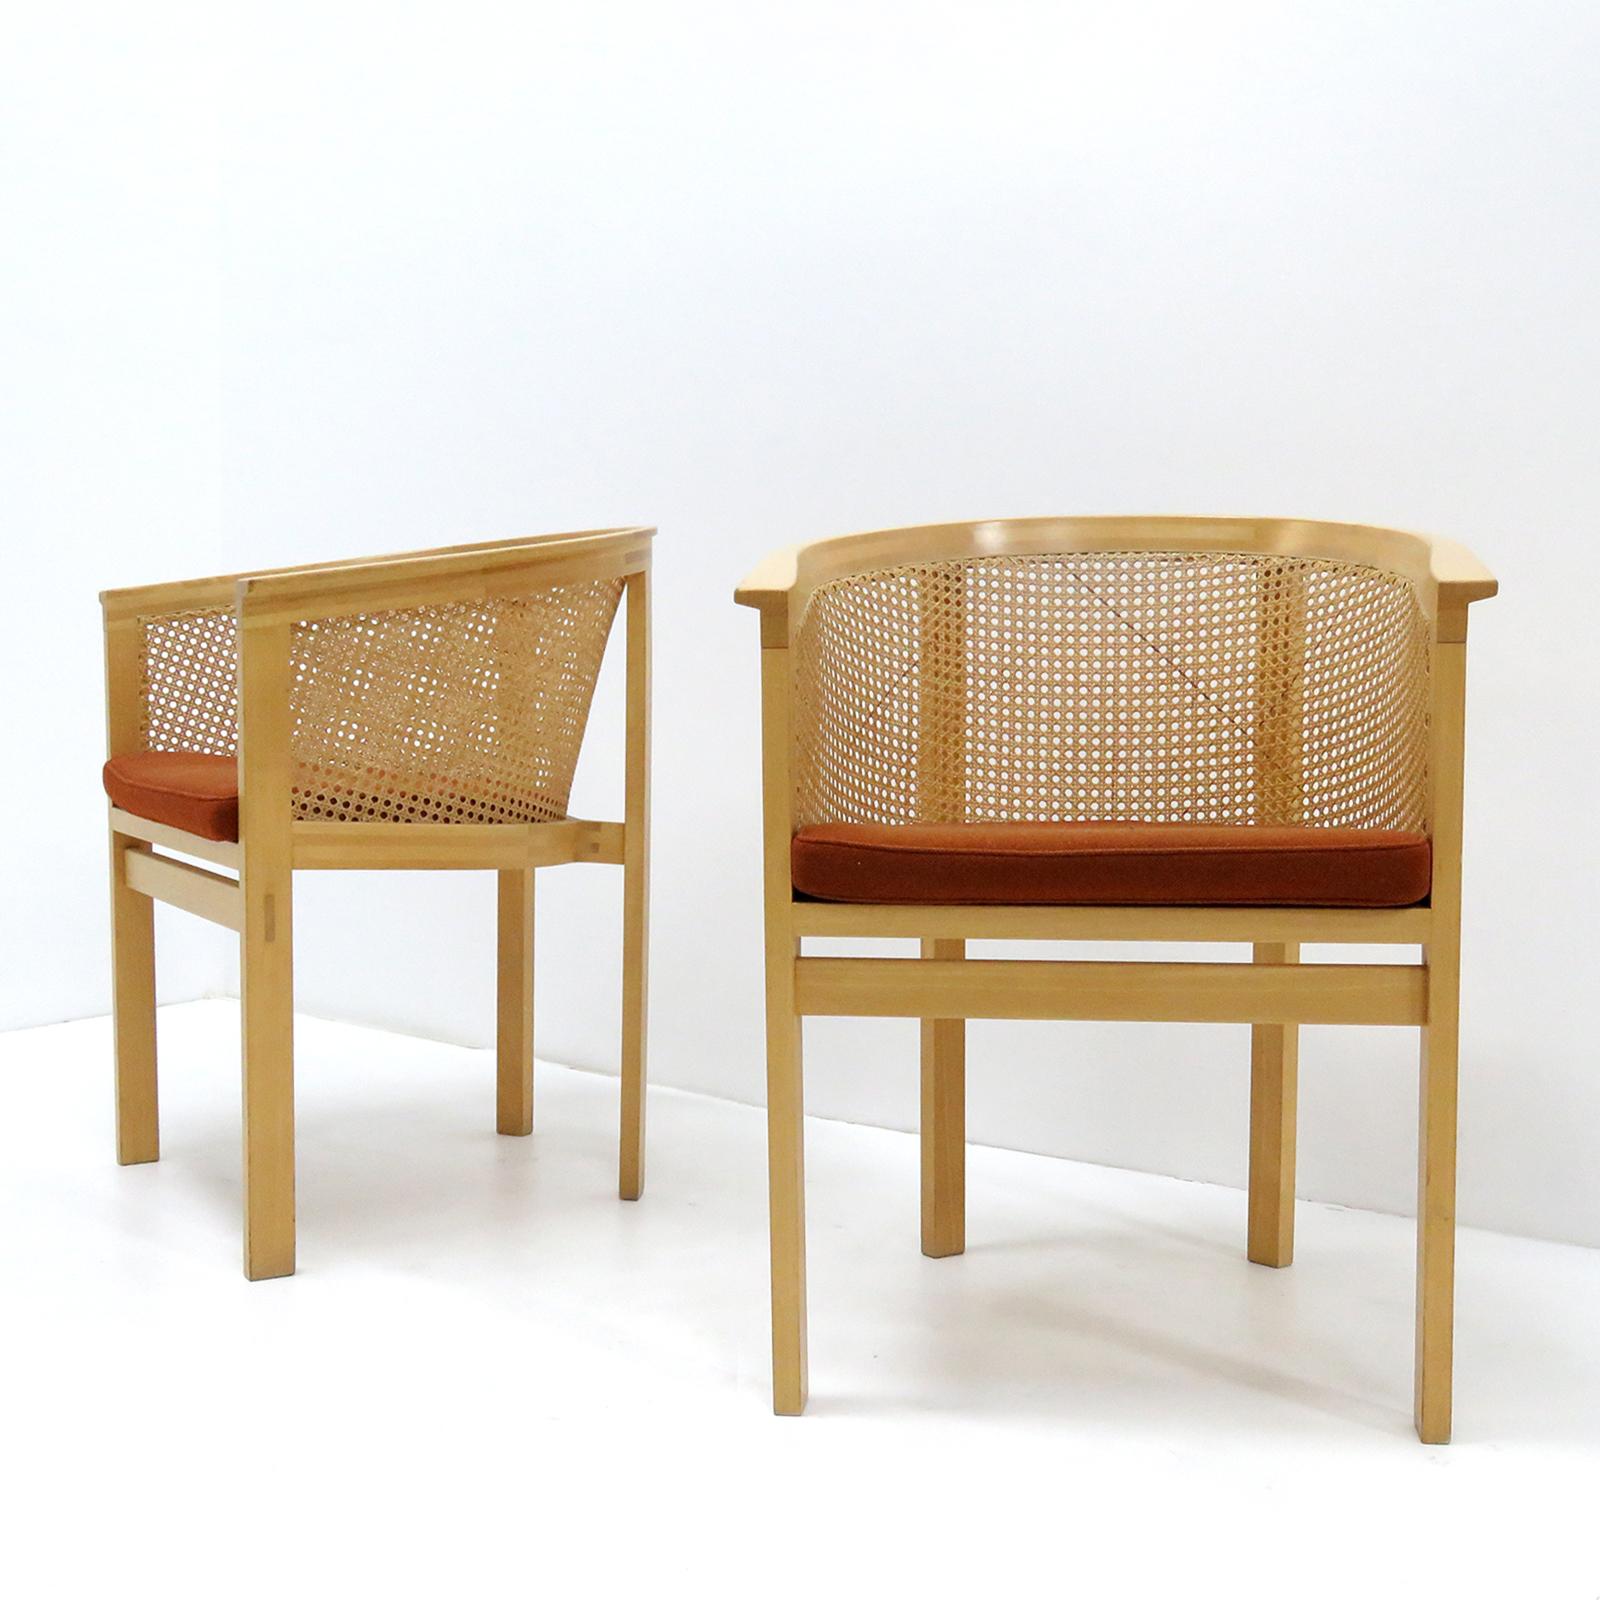 Wonderful Model 7703 armchairs designed by Rud Thygesen & Johnny Sørensen for Botium in 1989, beech frames with french wicker backs and burnt-orange wool cushions, part of the 'King' series designed in 1969 as gifts for the Danish King Frederik IX